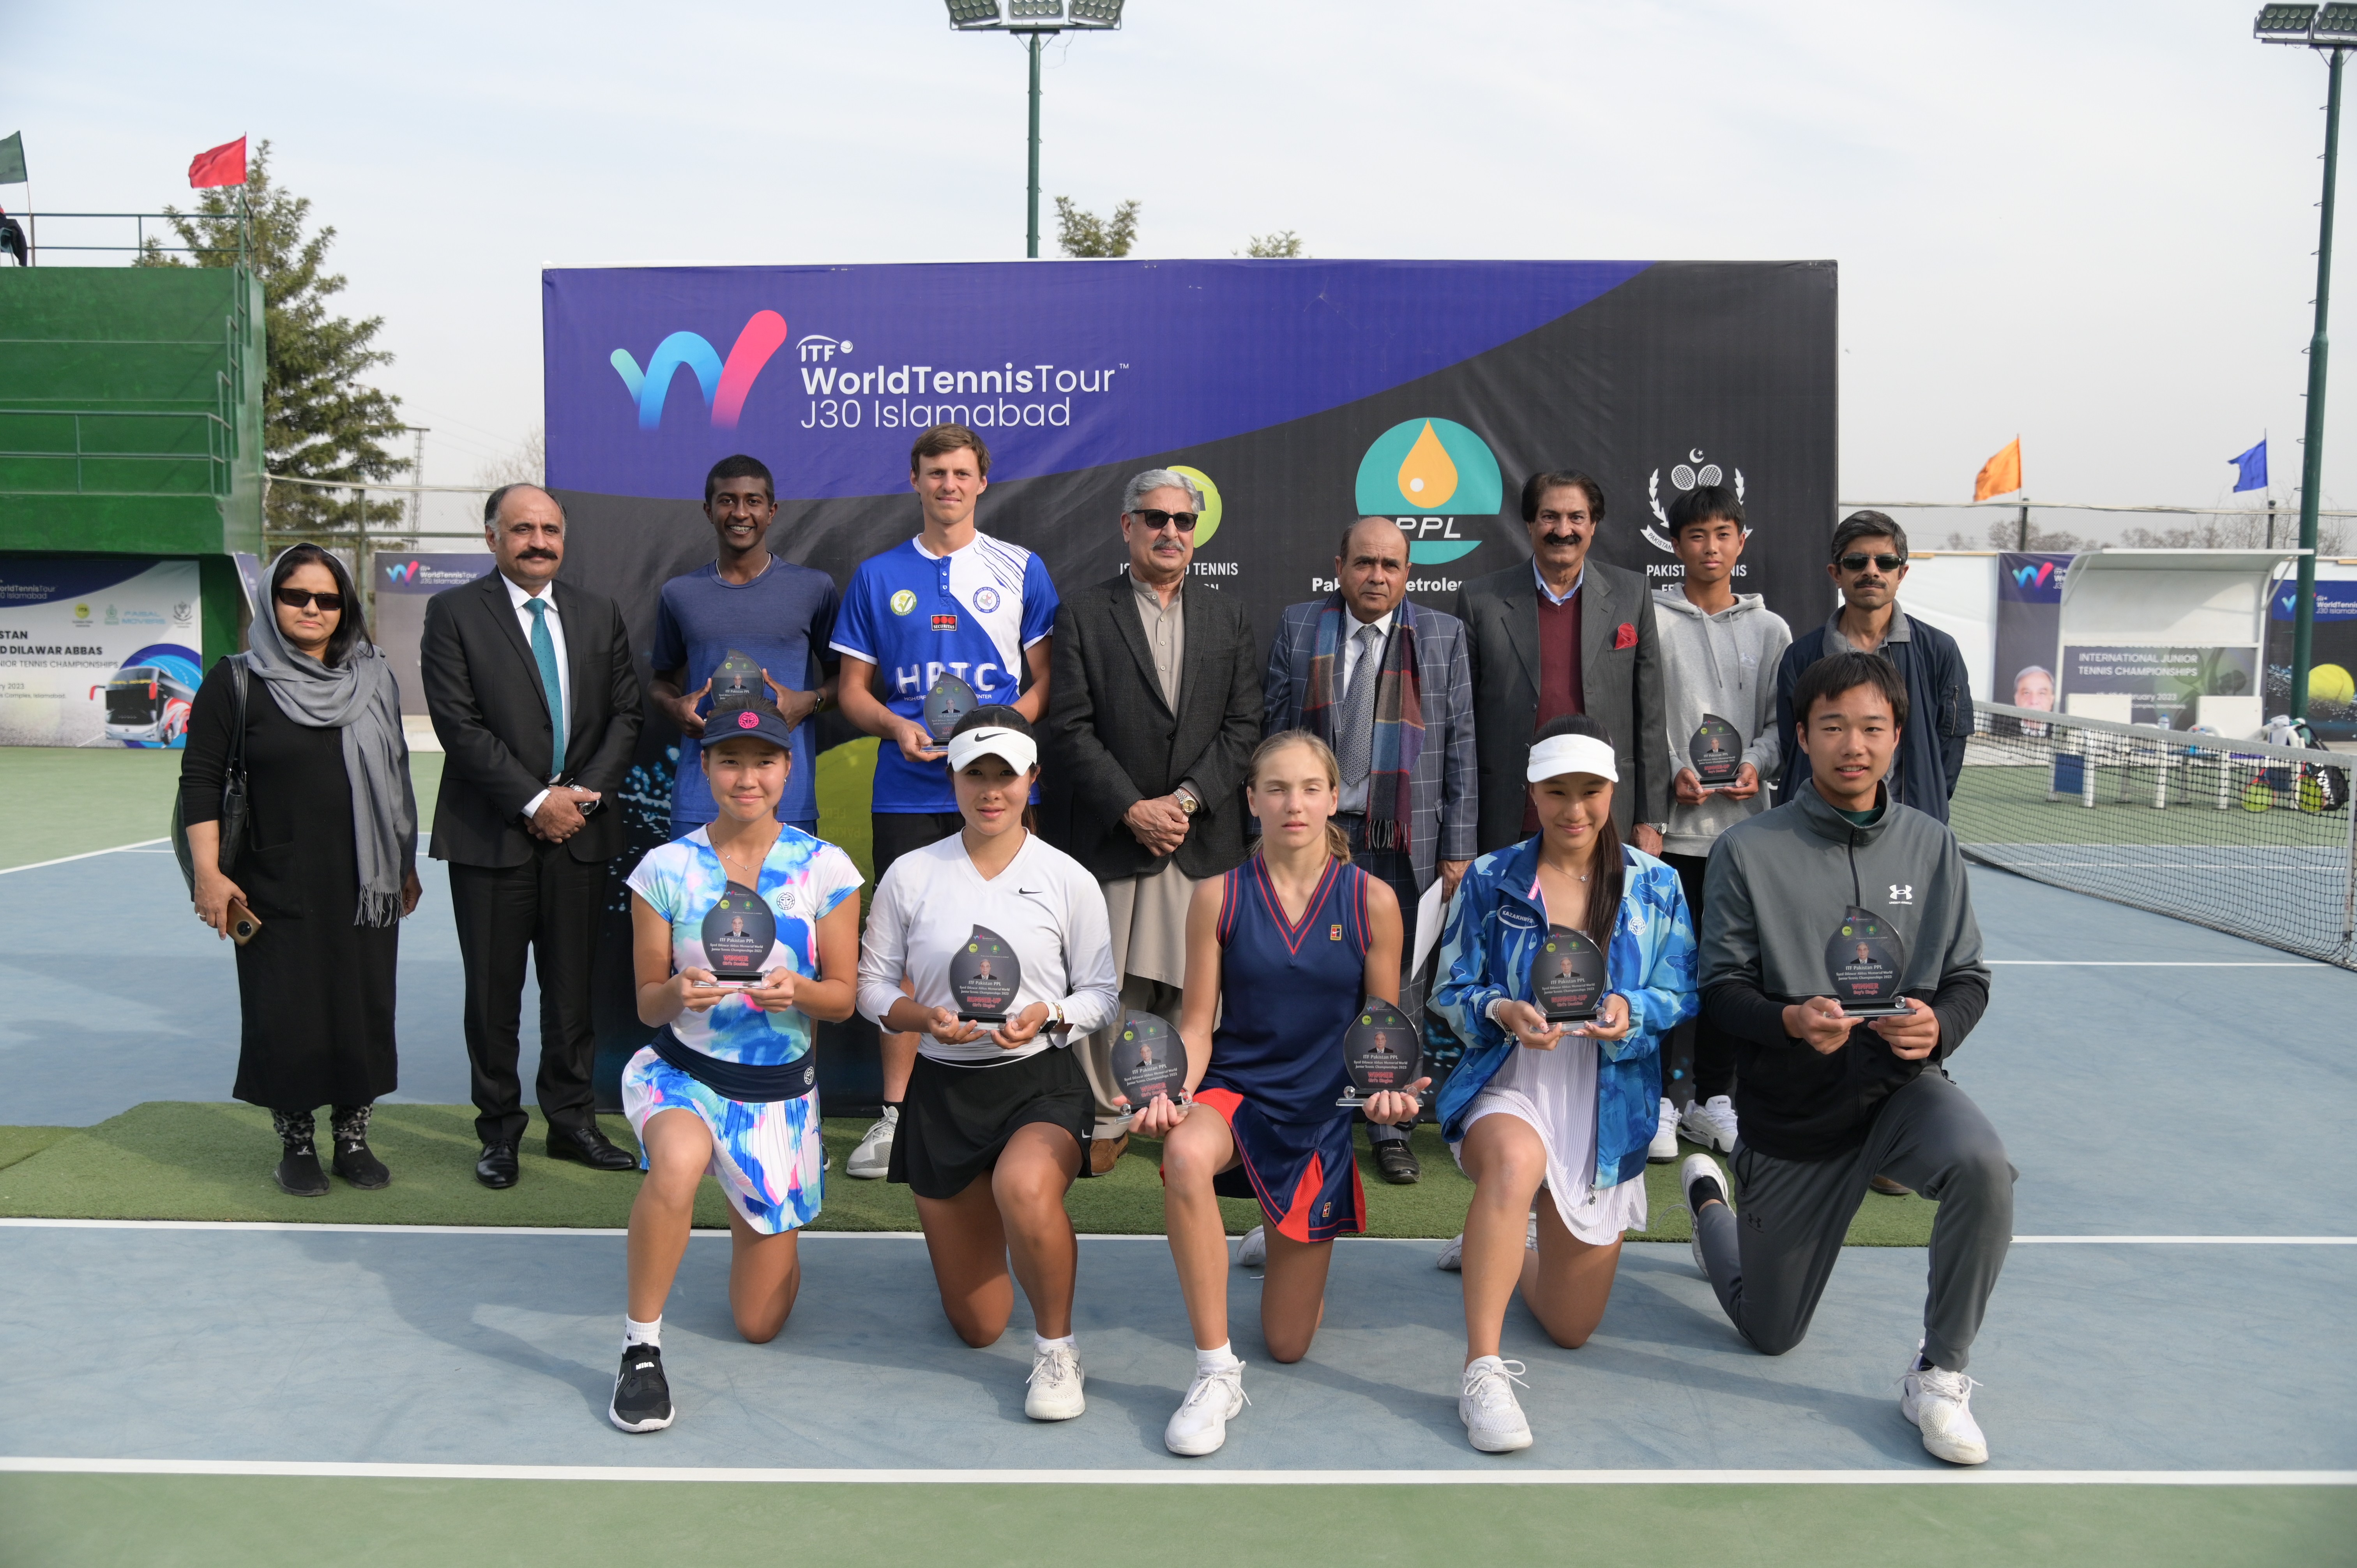 A group photo of winning tennis players